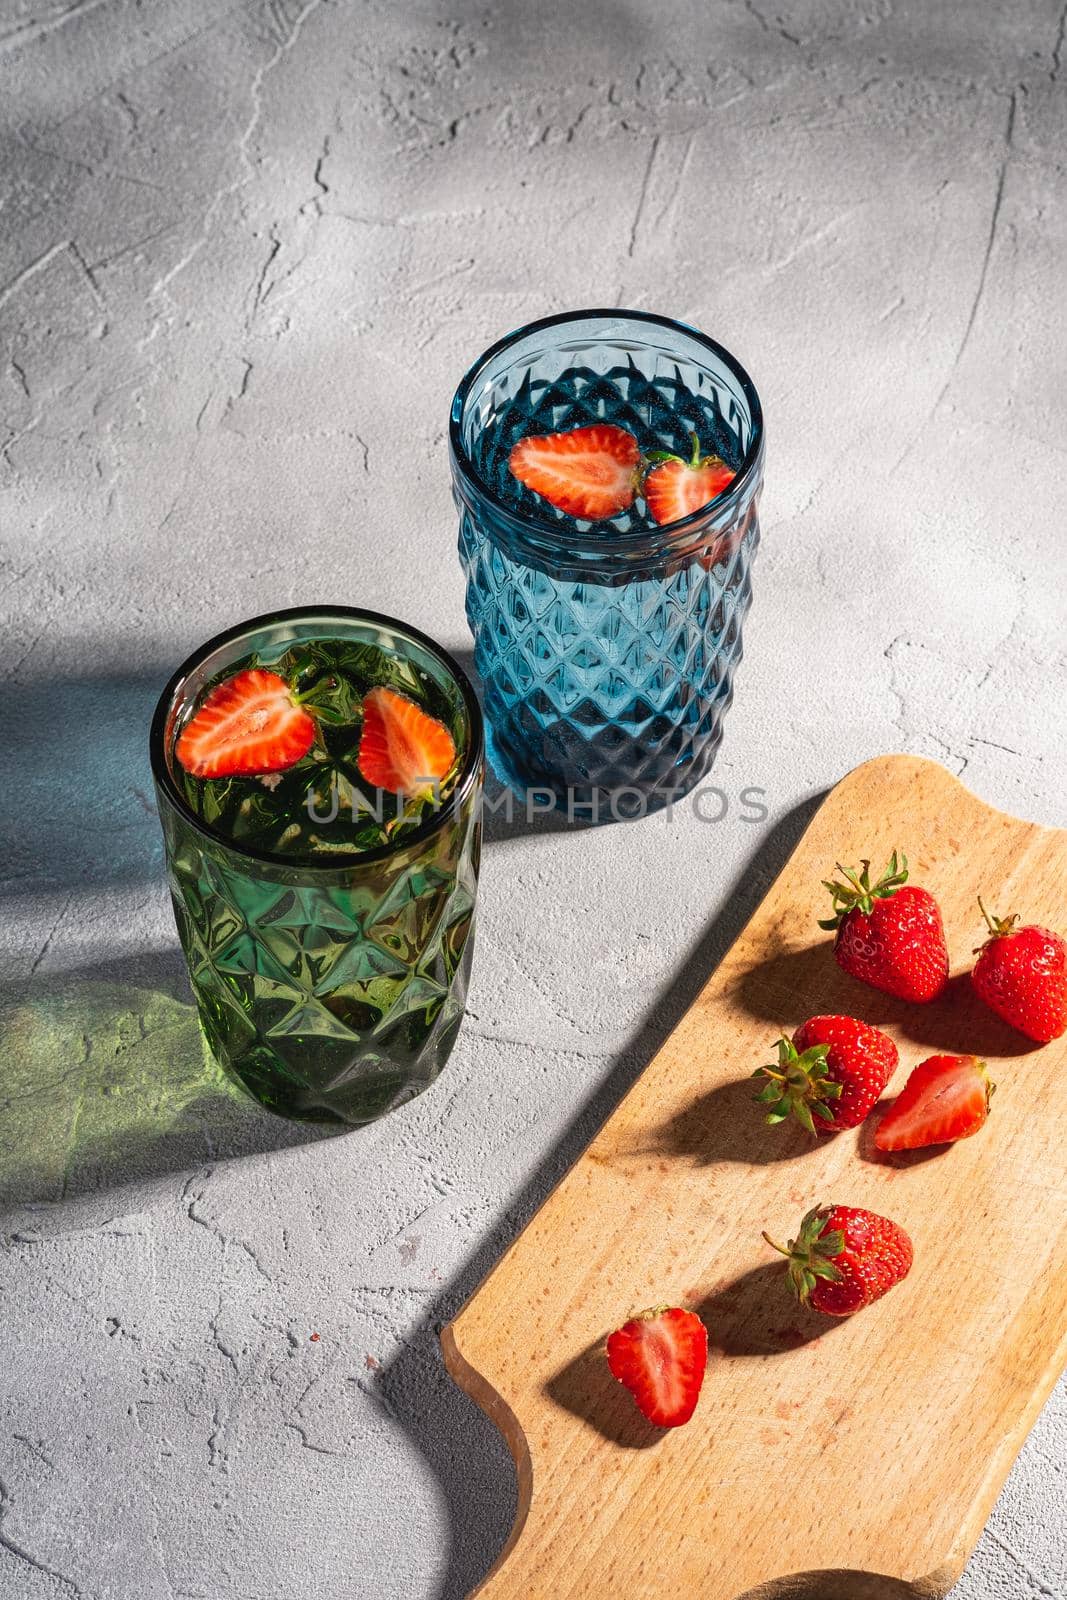 Two green and blue geometric glass cup with fresh water and strawberry fruits with colorful shadow light rays near to wooden cutting board on stone concrete background, angle view